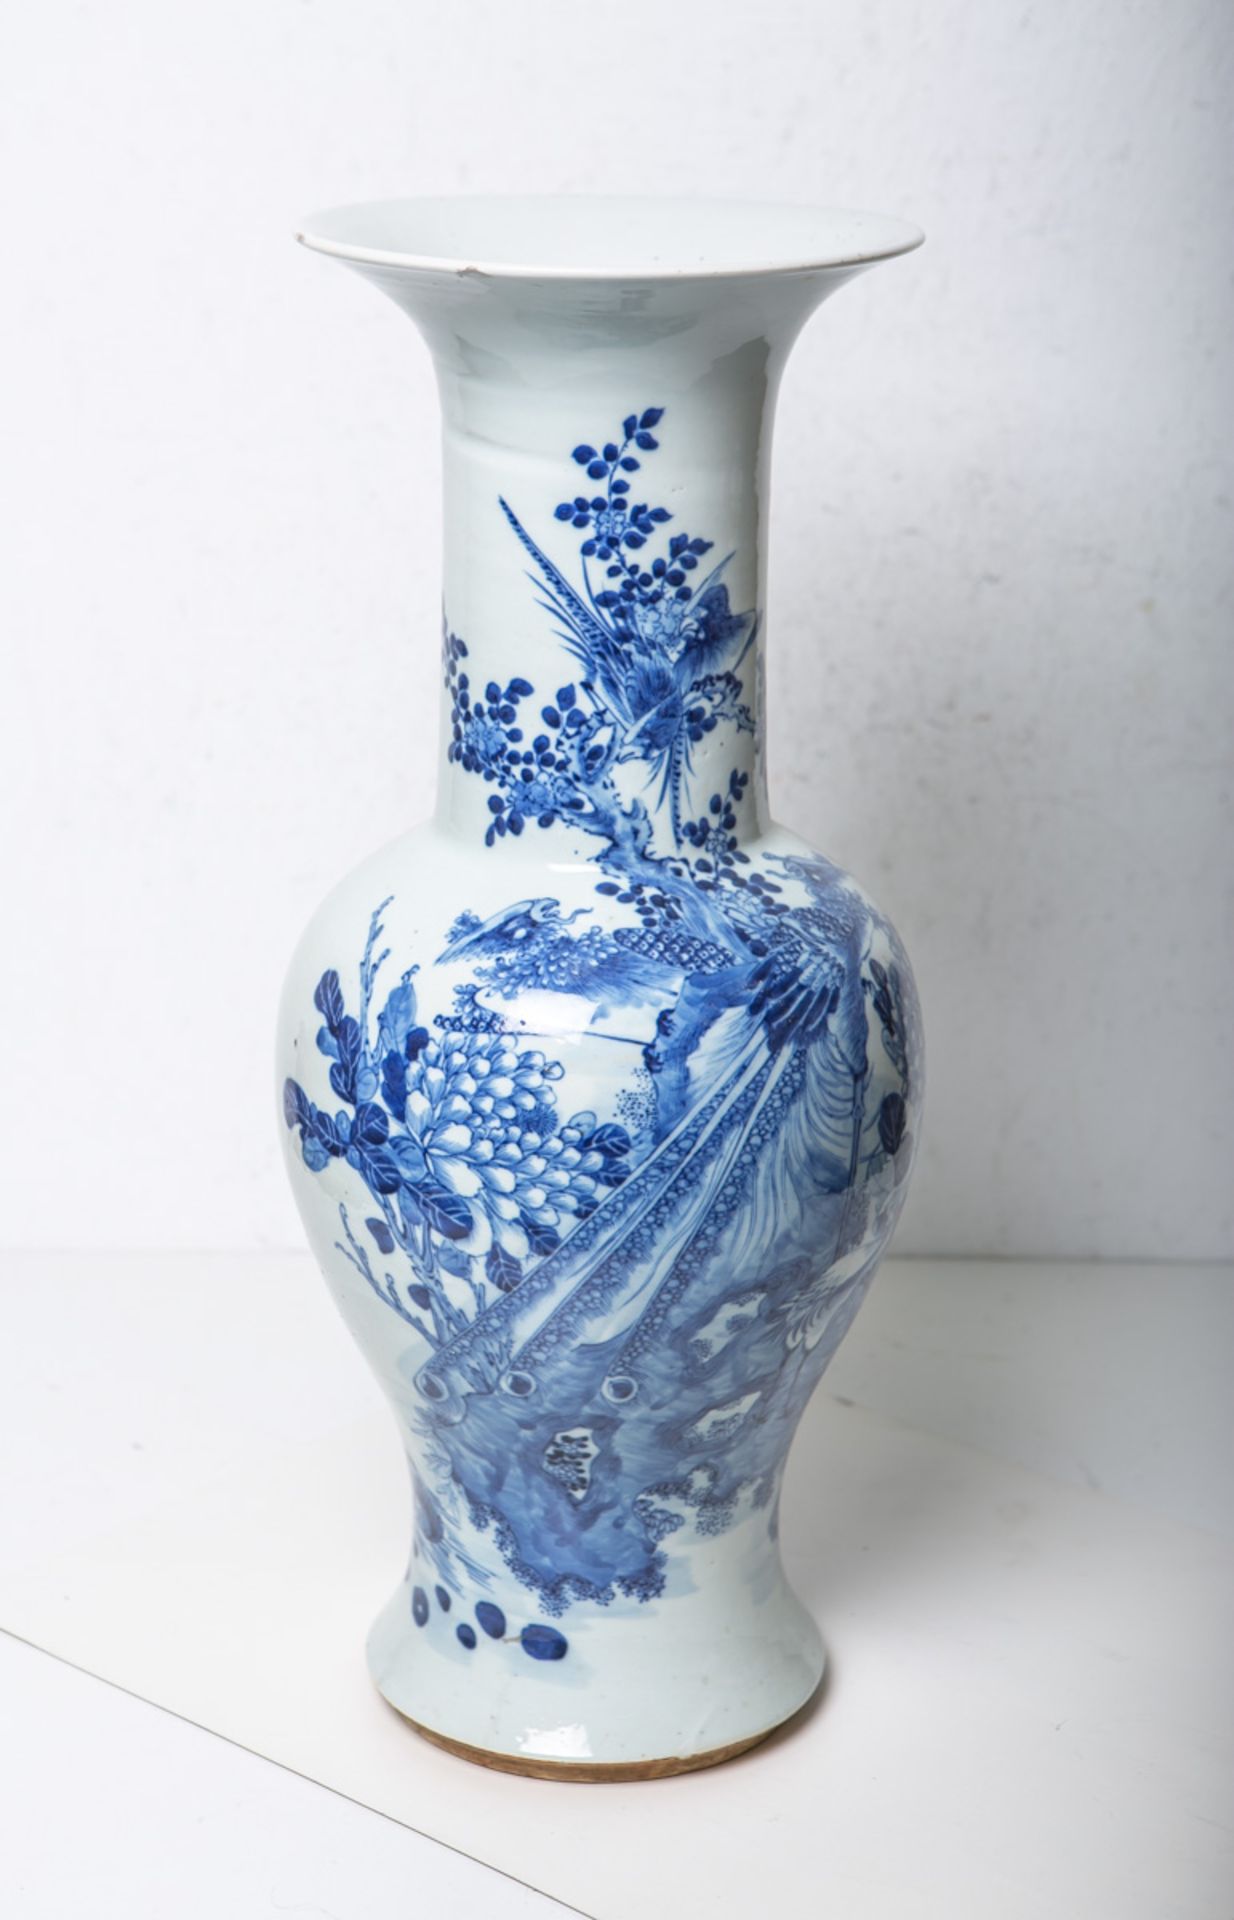 Bodenvase (China, wohl 18. Jh.) - Image 2 of 2